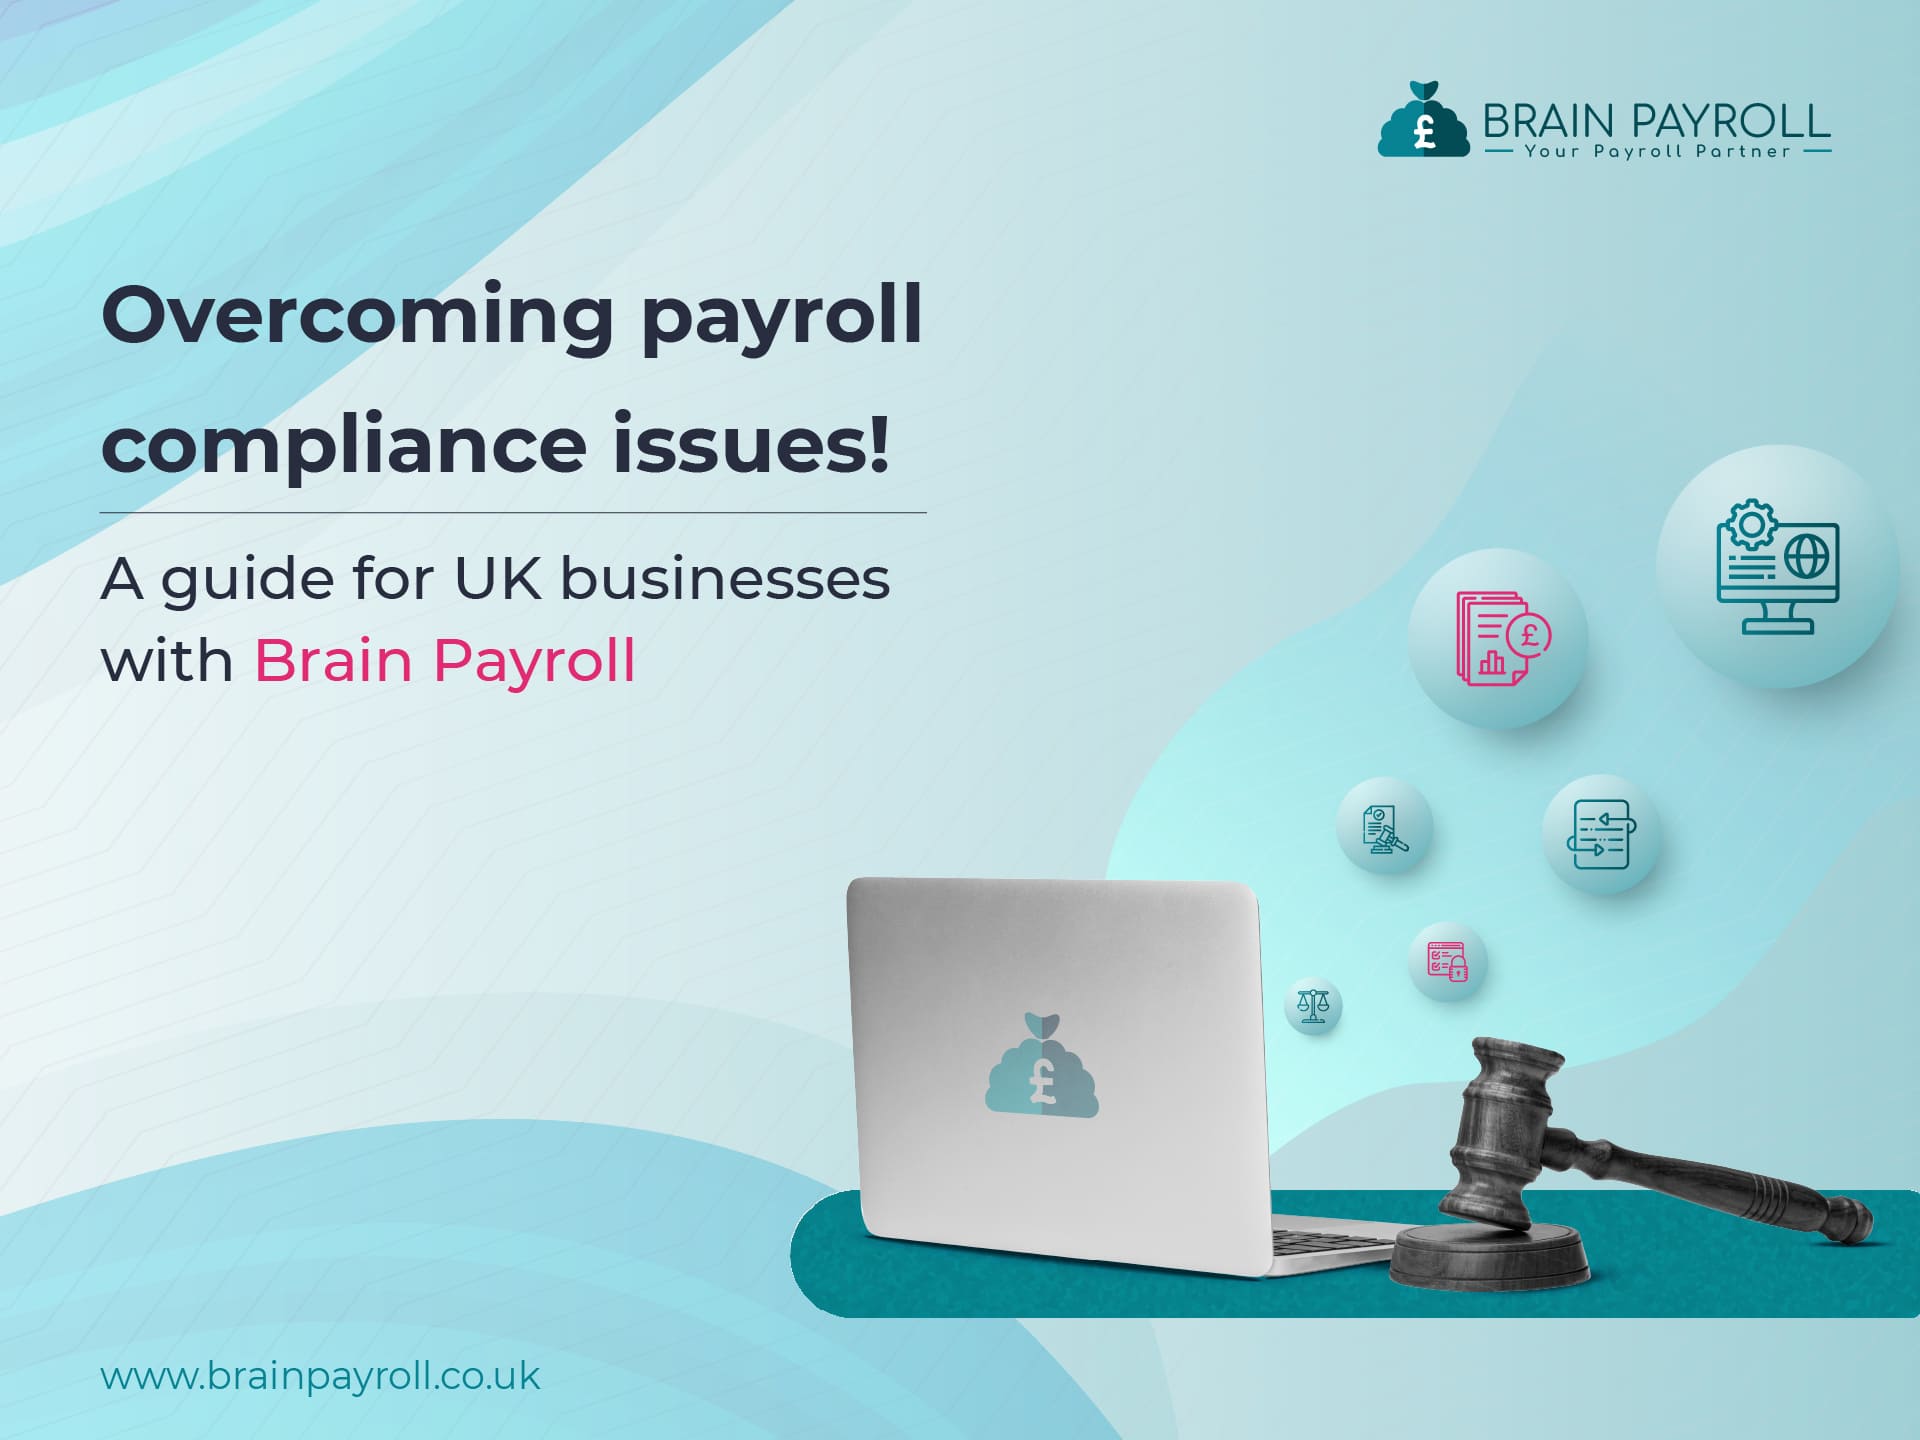 Overcoming Payroll Compliance Issues - Guide for UK Businesses with Brain Payroll